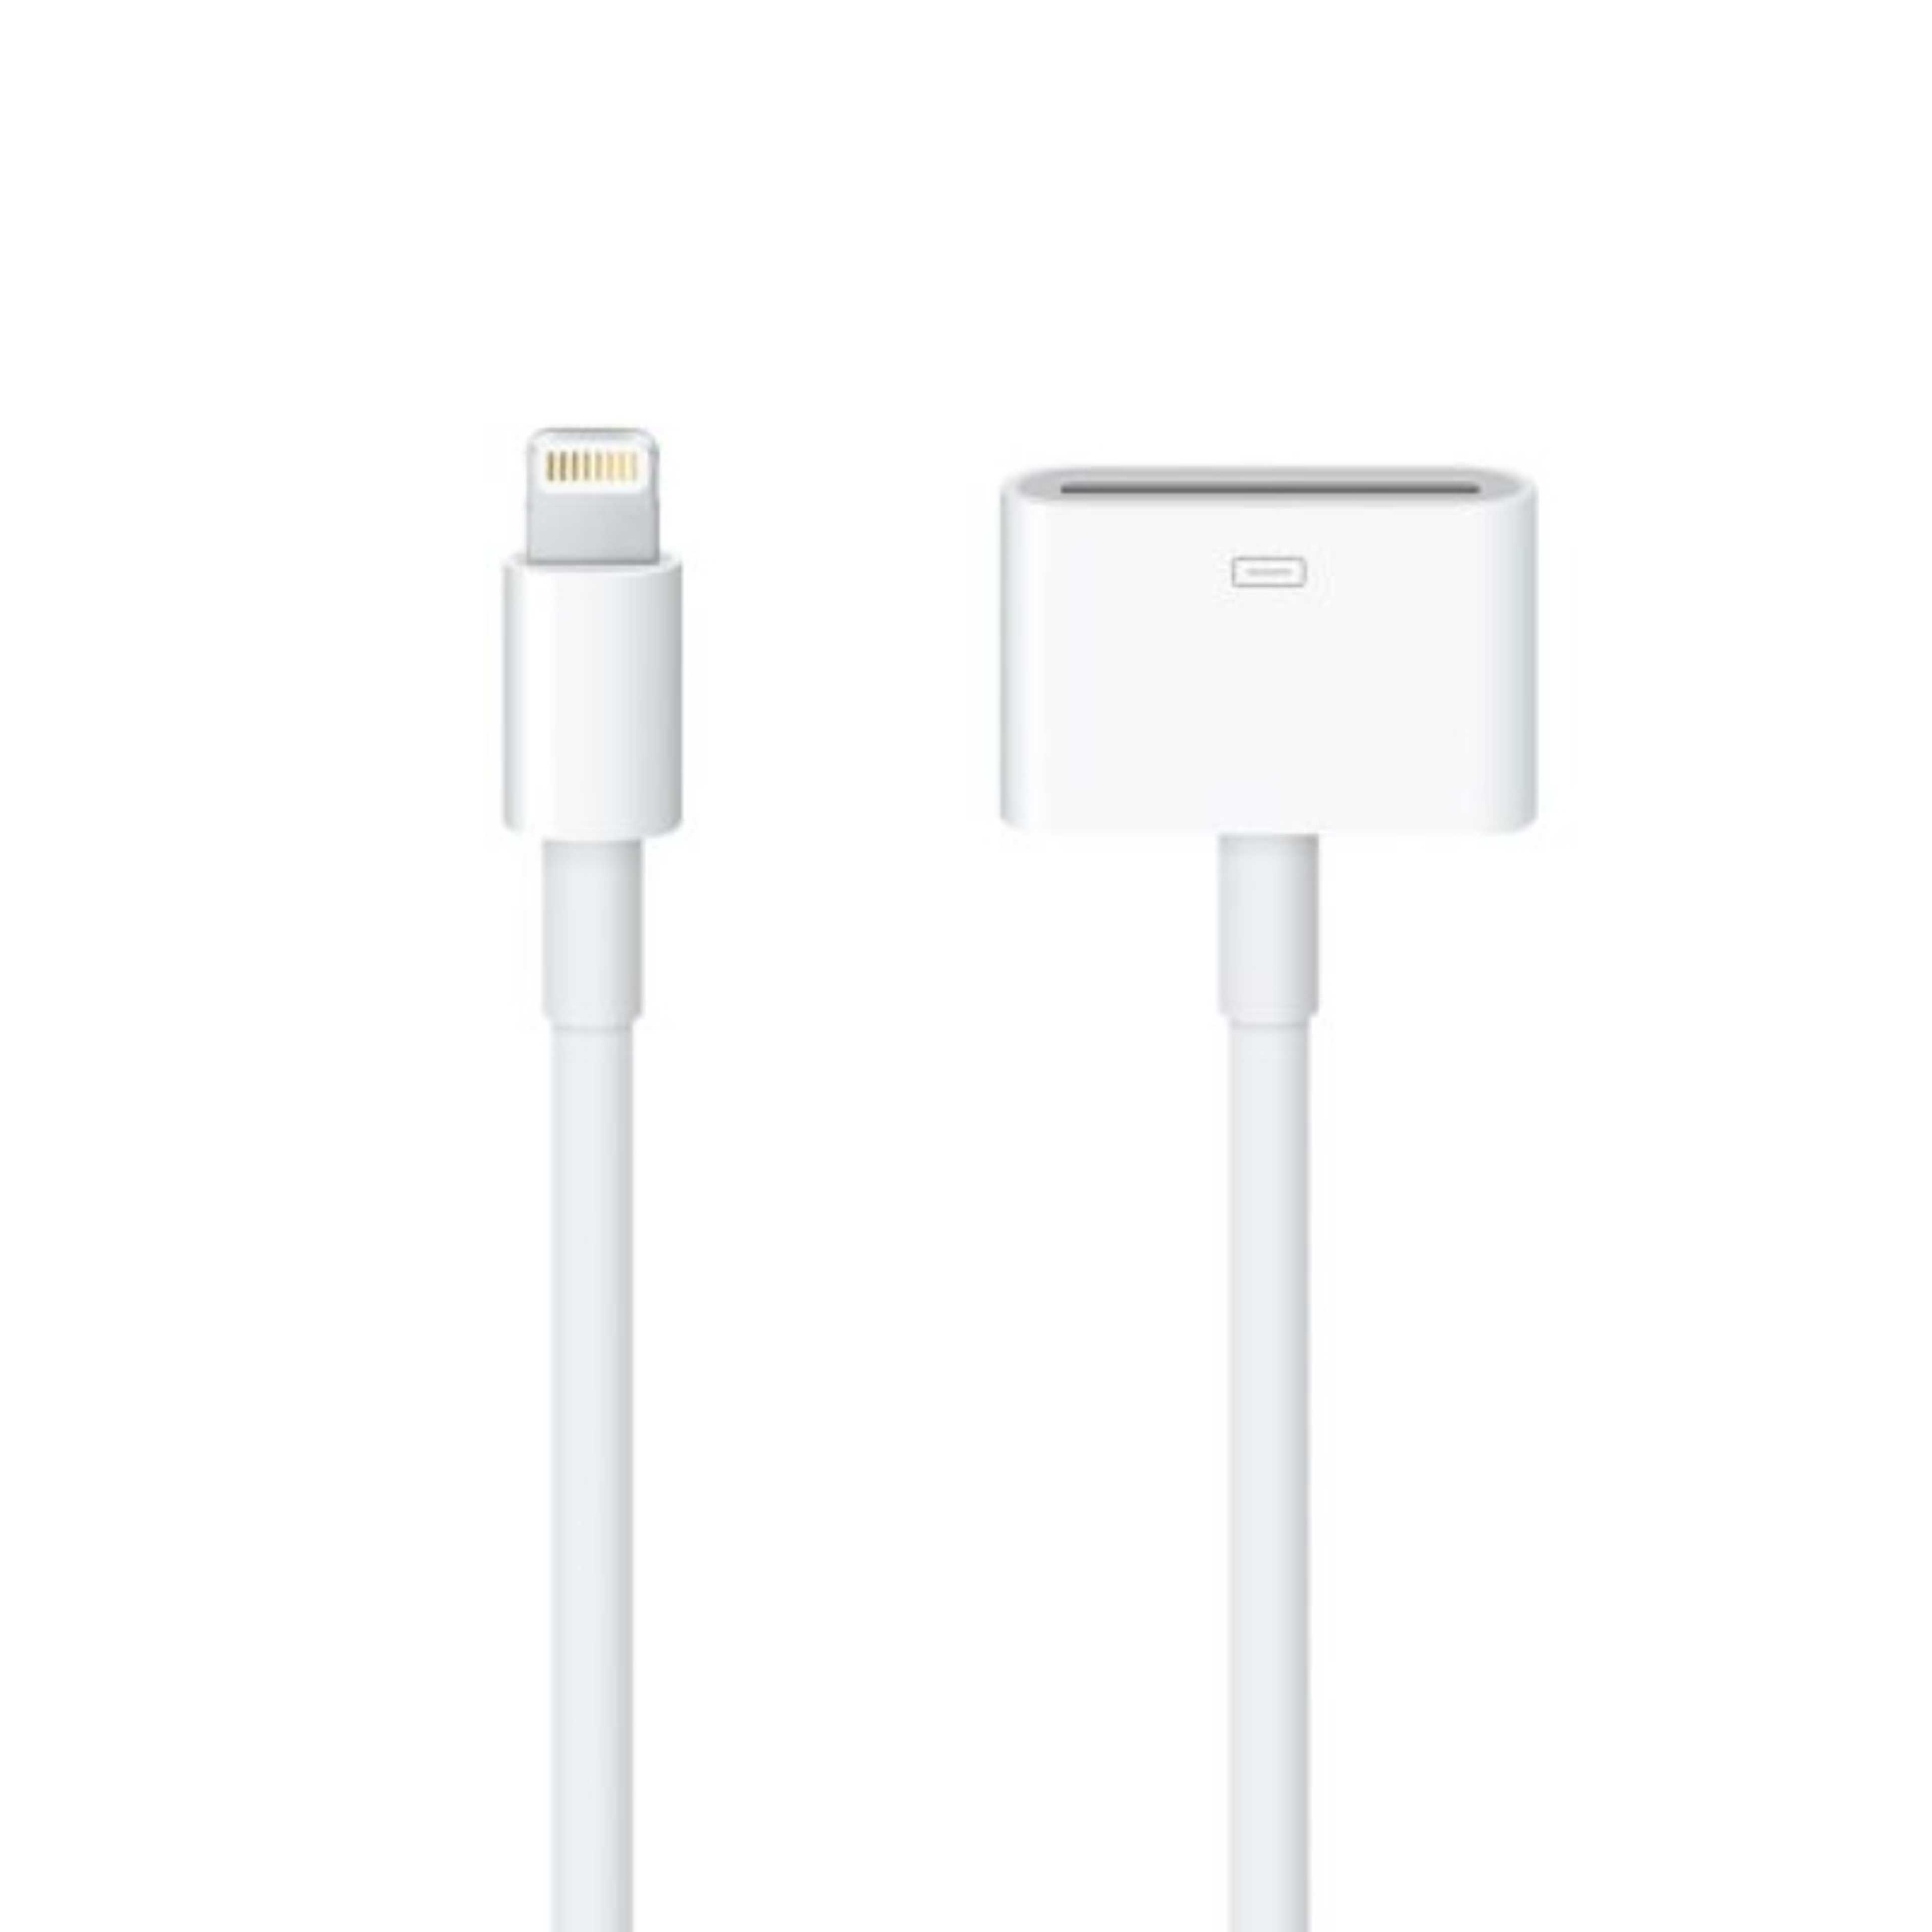 Apple Lightning to 30 pin Adapter – MD824AMA